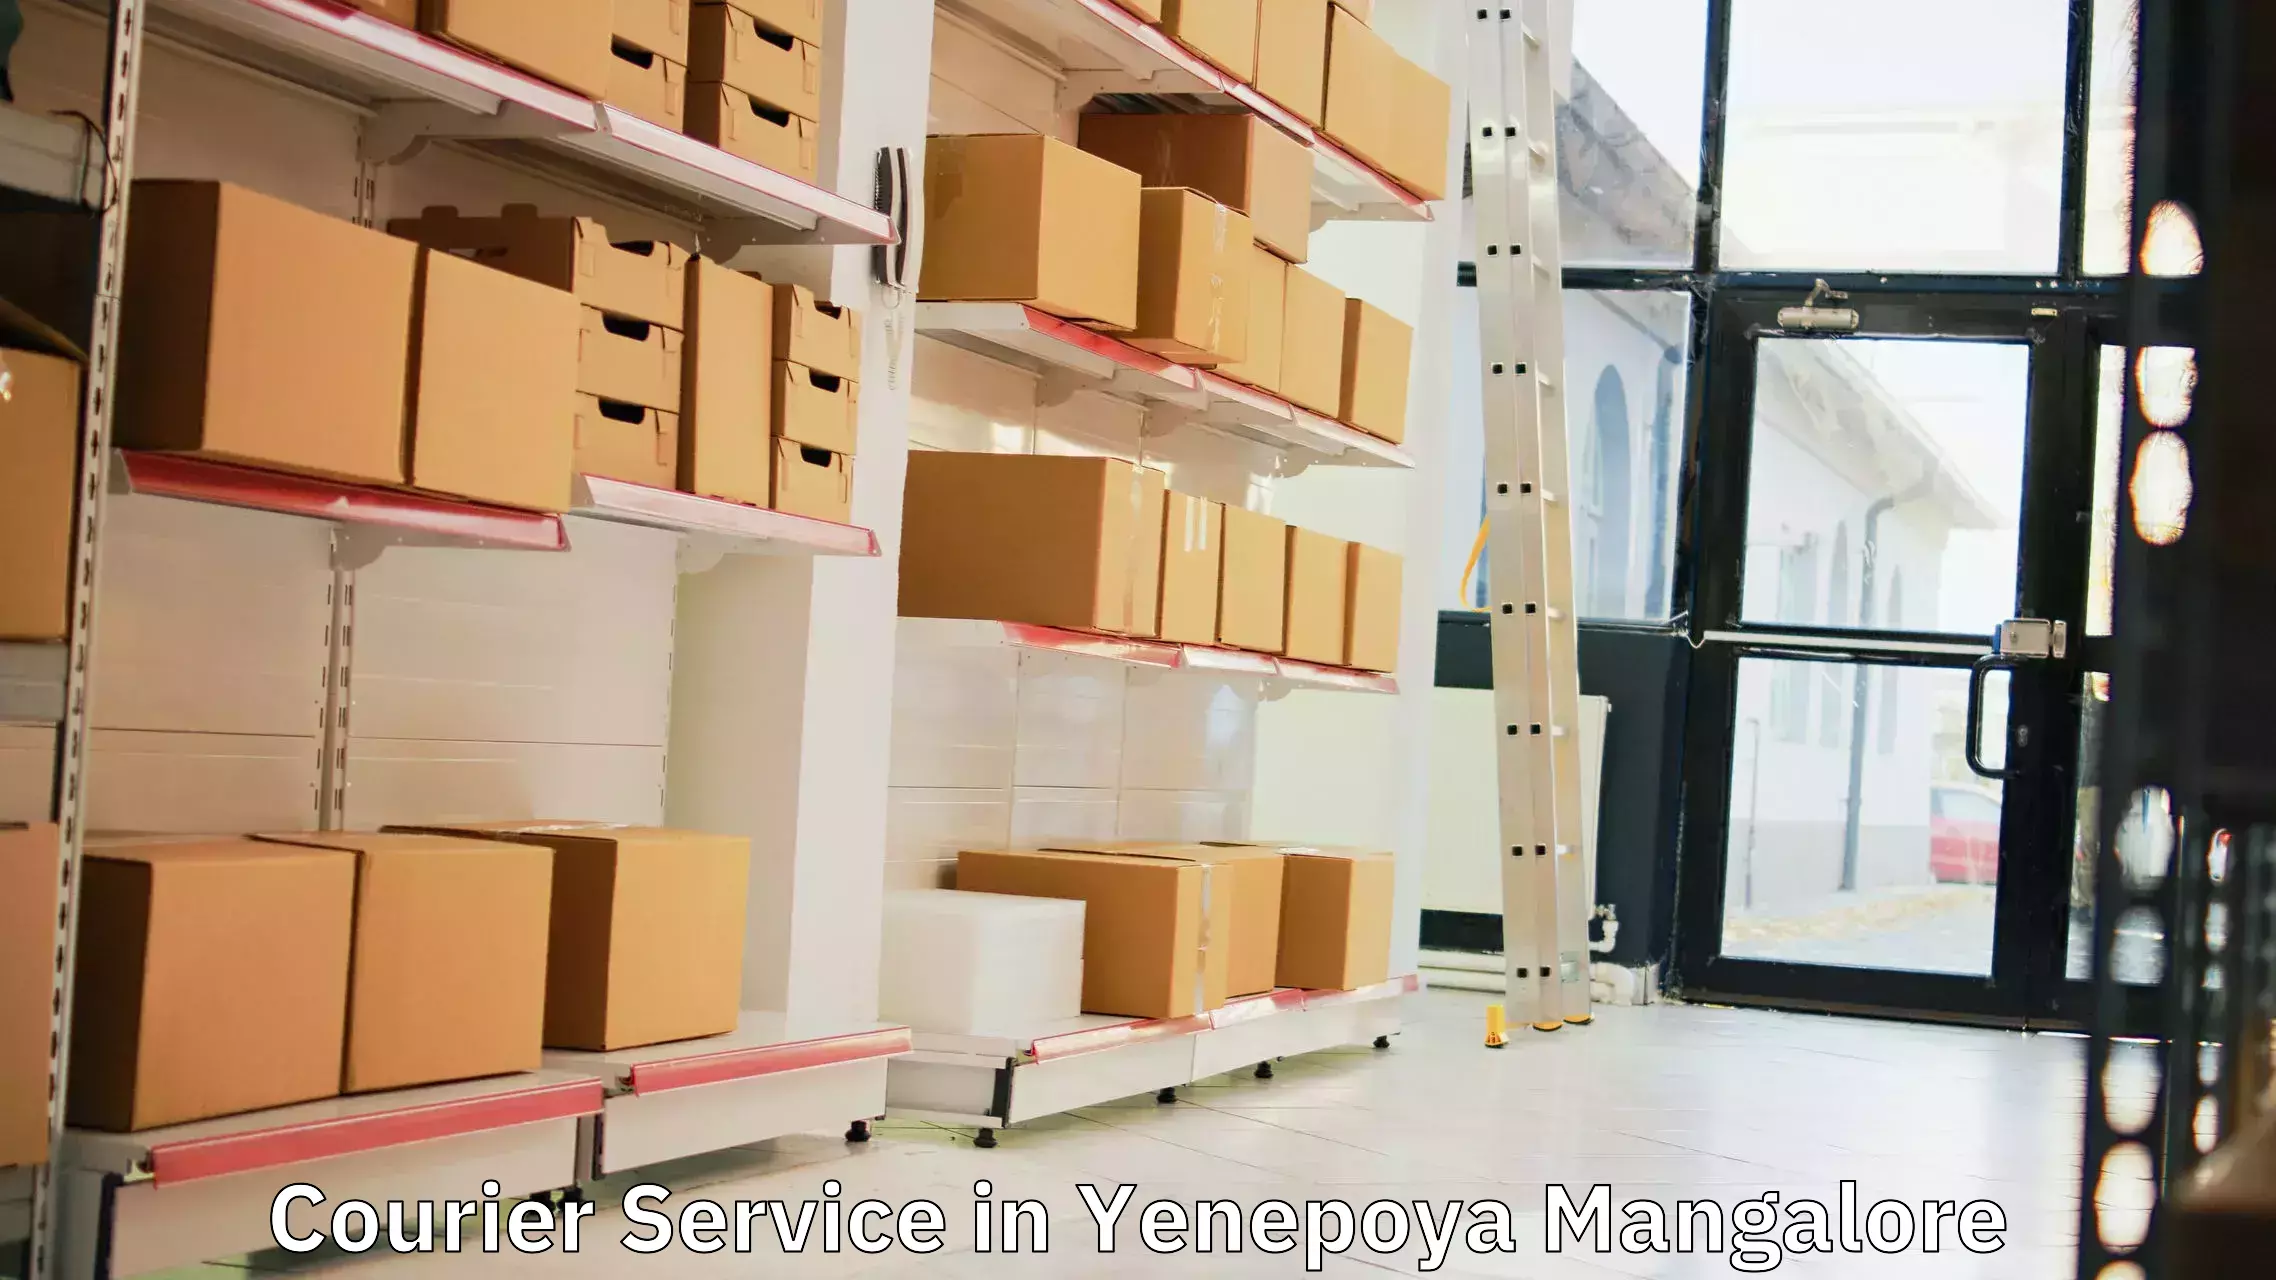 Multi-national courier services in Yenepoya Mangalore